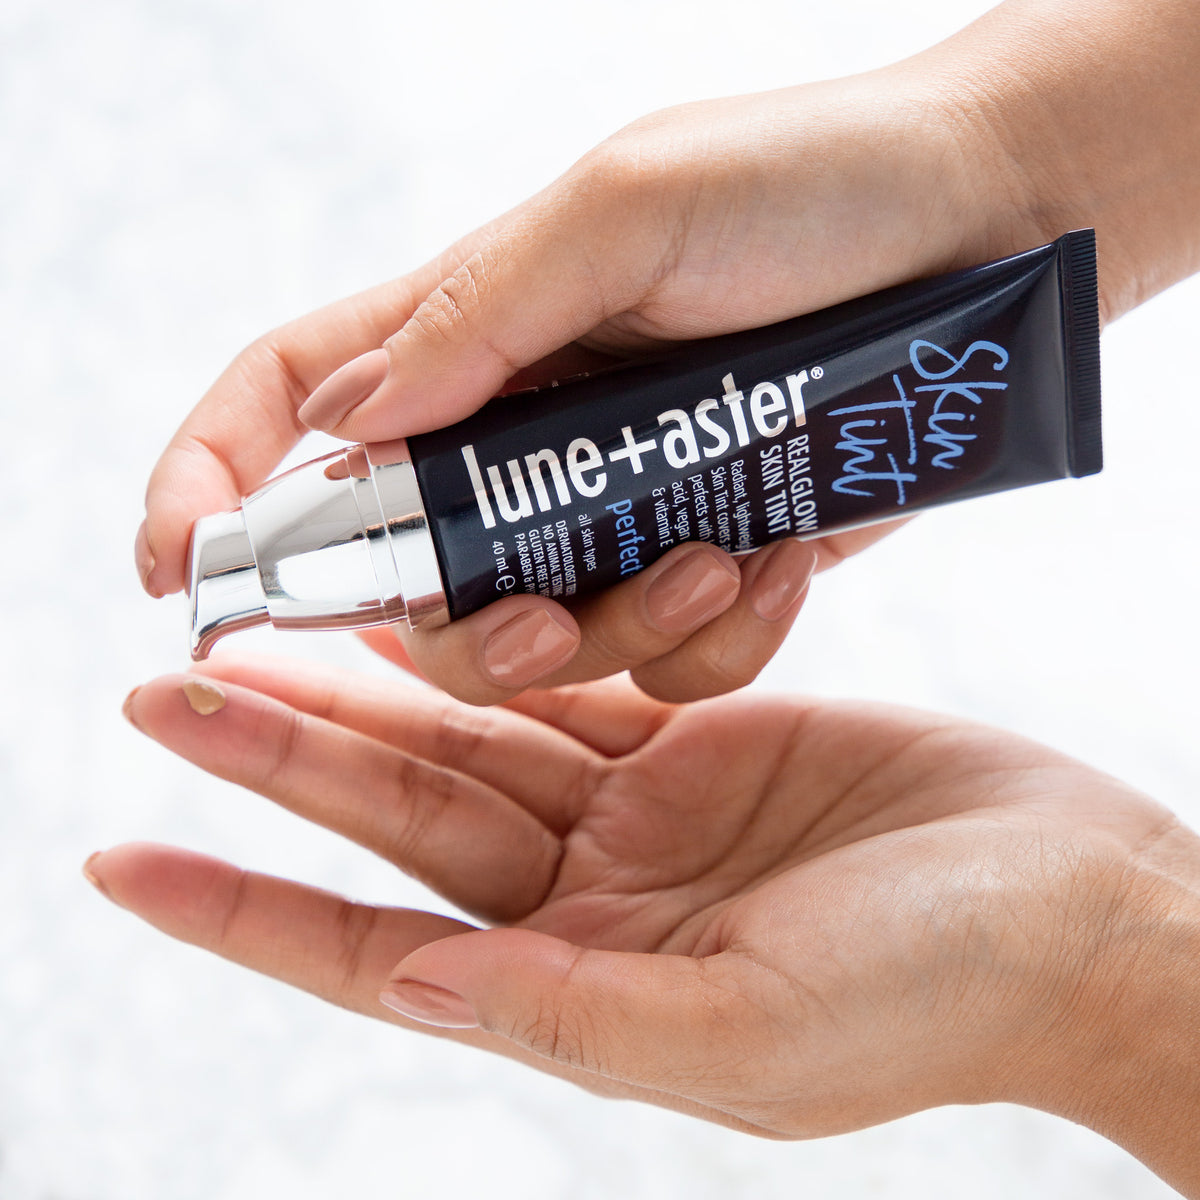 Lune+Aster Realglow Skin Tint . This product is for light complexions